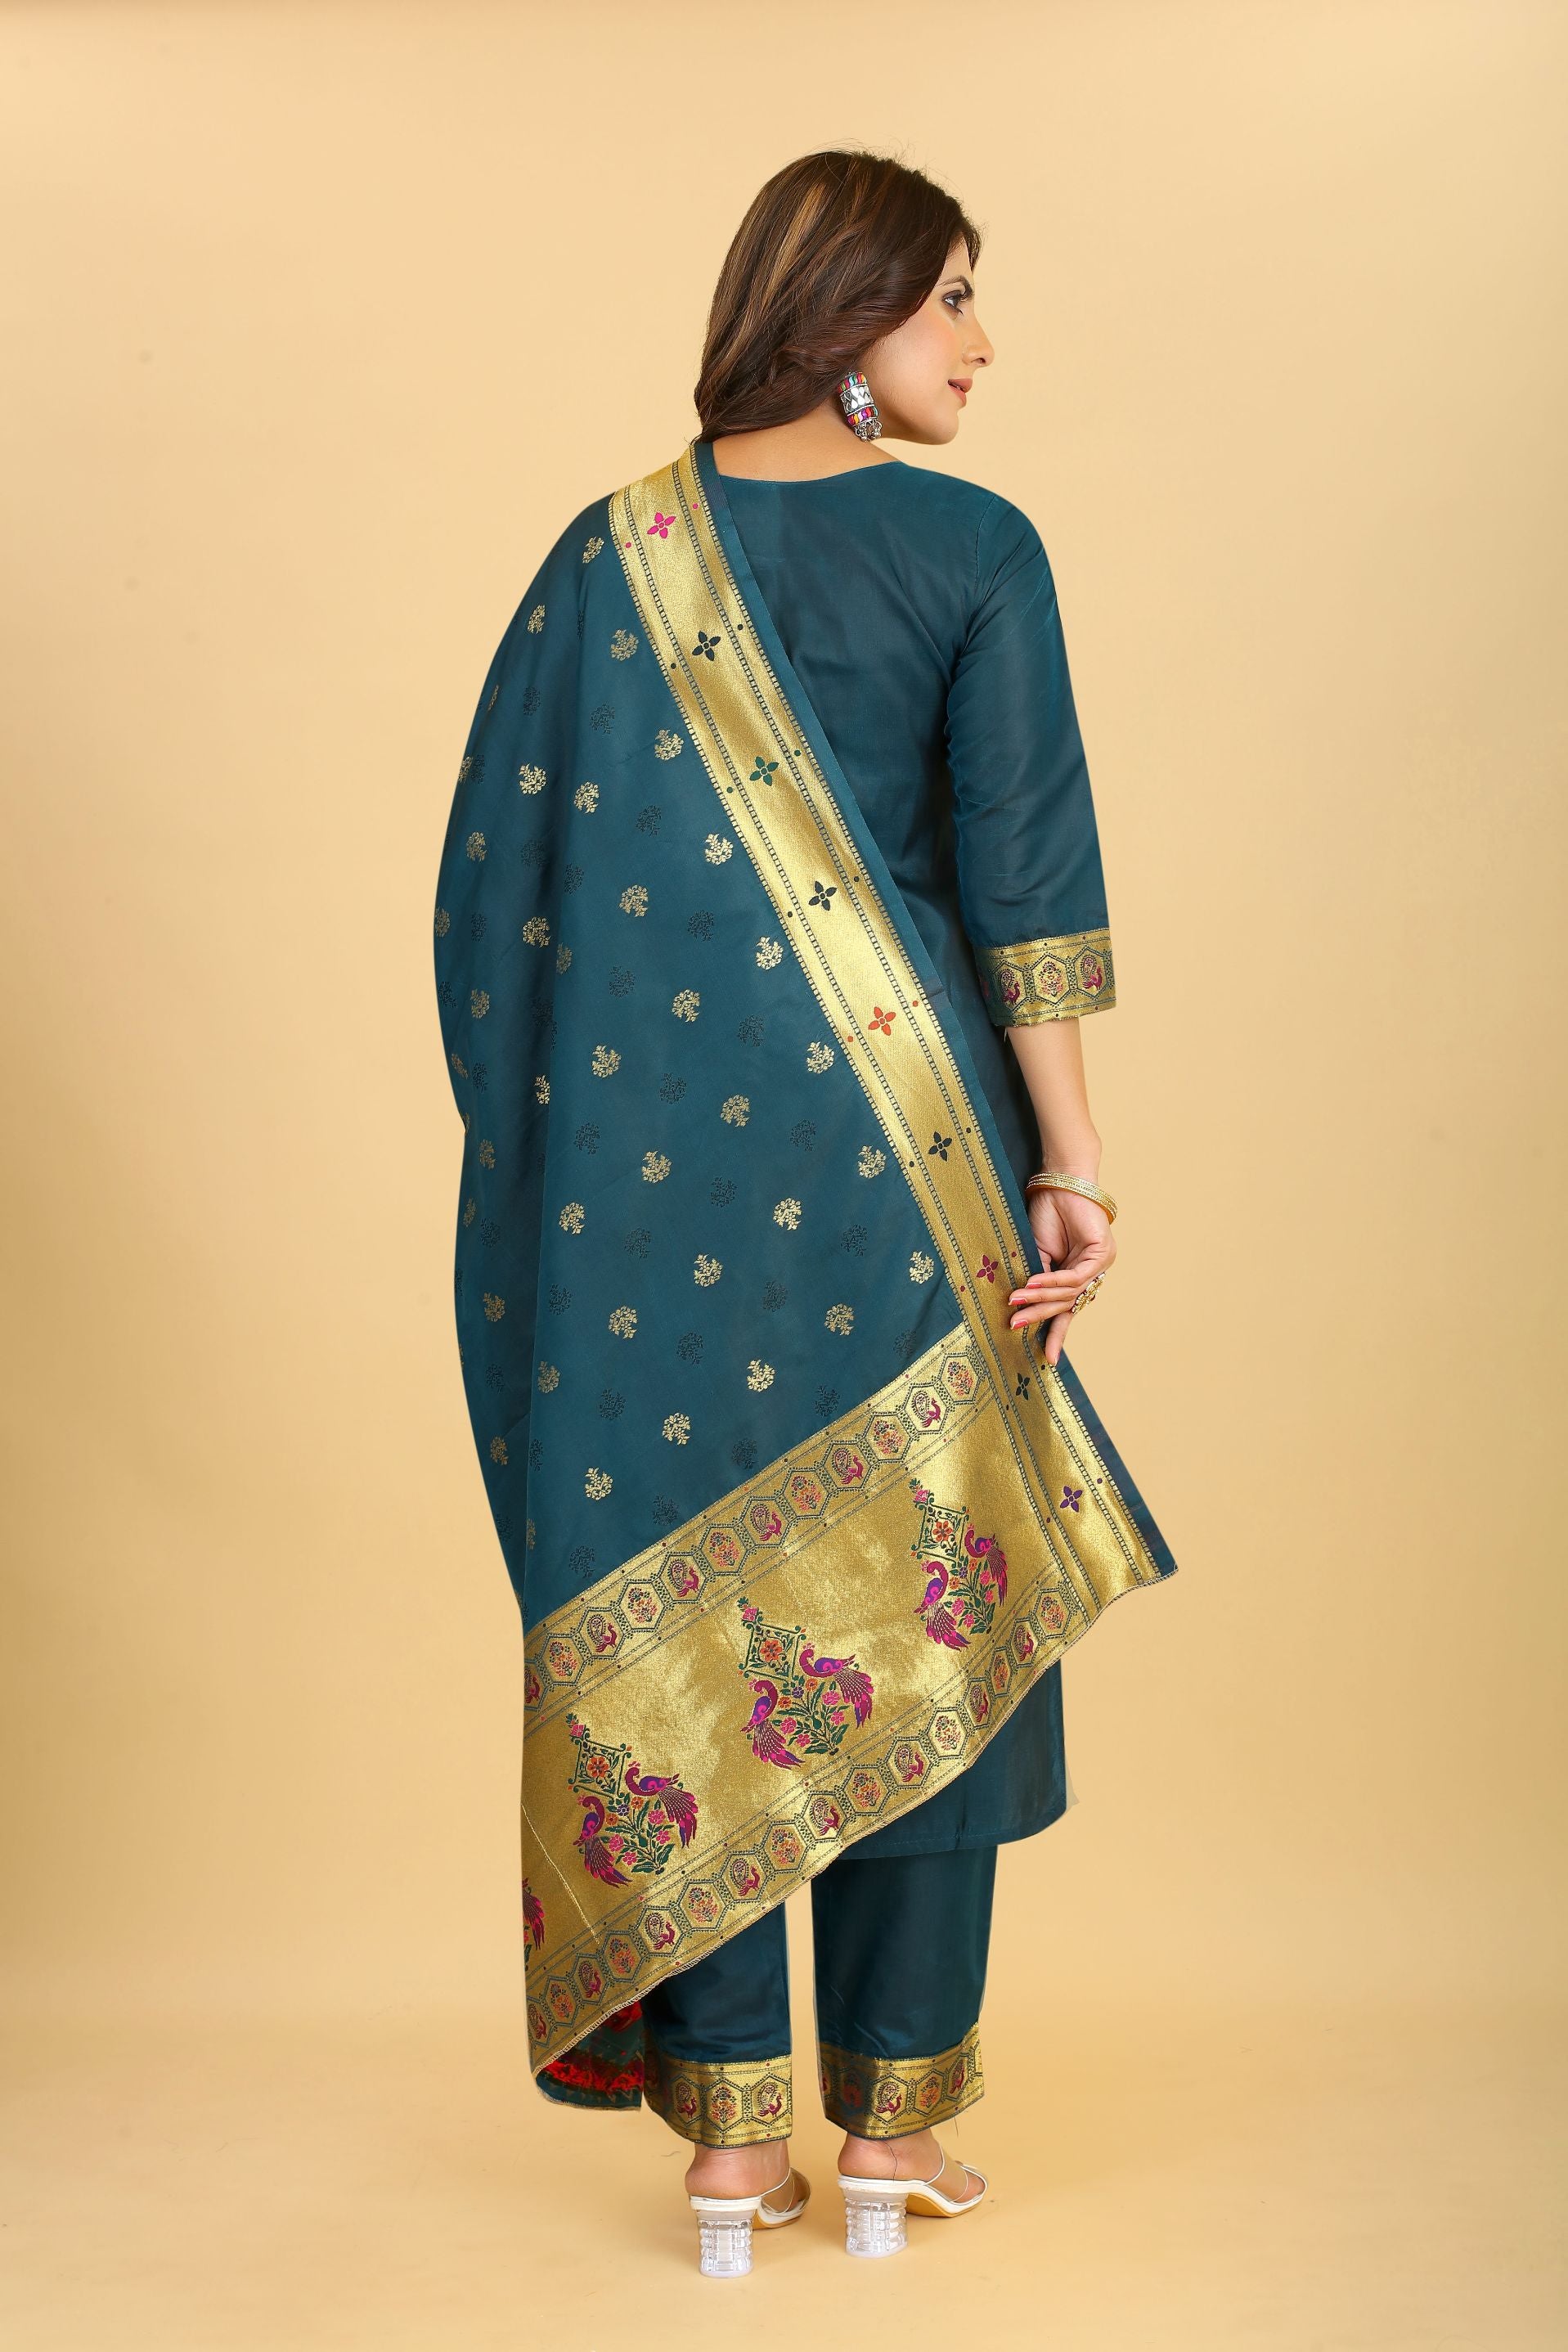 Rama Color silk suits dress material in zari weaving work suits in Paithani Style